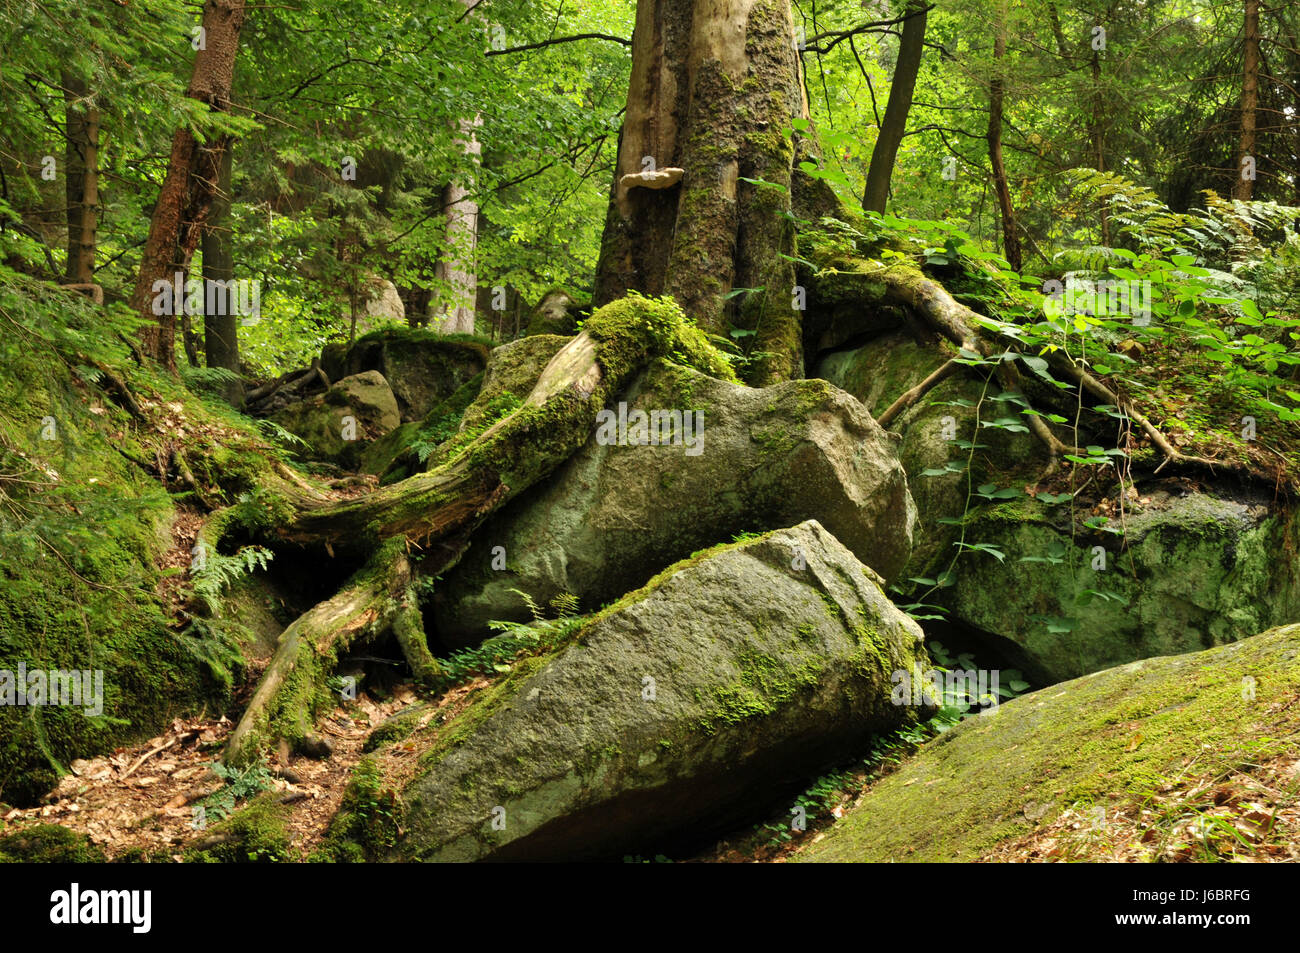 virgin forest rock mystic clasp forest tree root book leaf tree trees strong Stock Photo